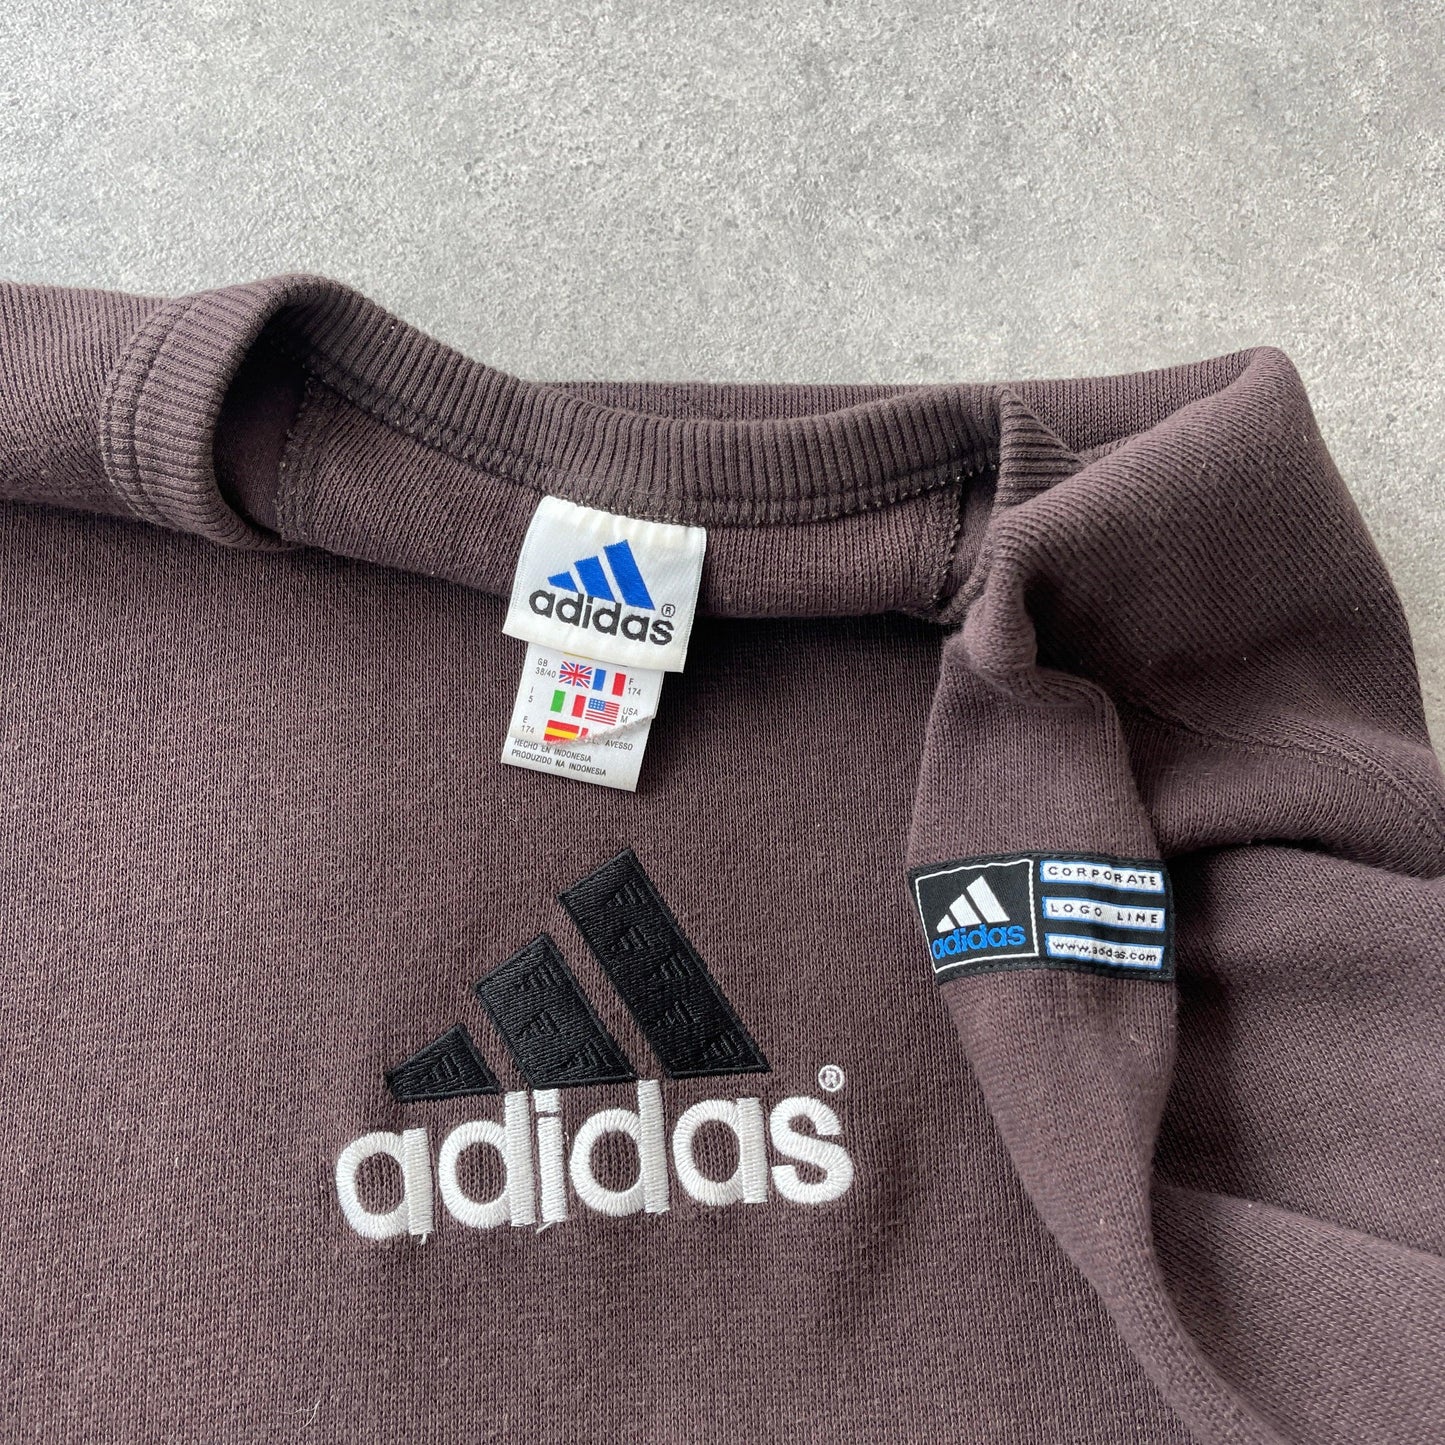 Adidas RARE 1990s heavyweight embroidered ribbed sweatshirt (M) - Known Source